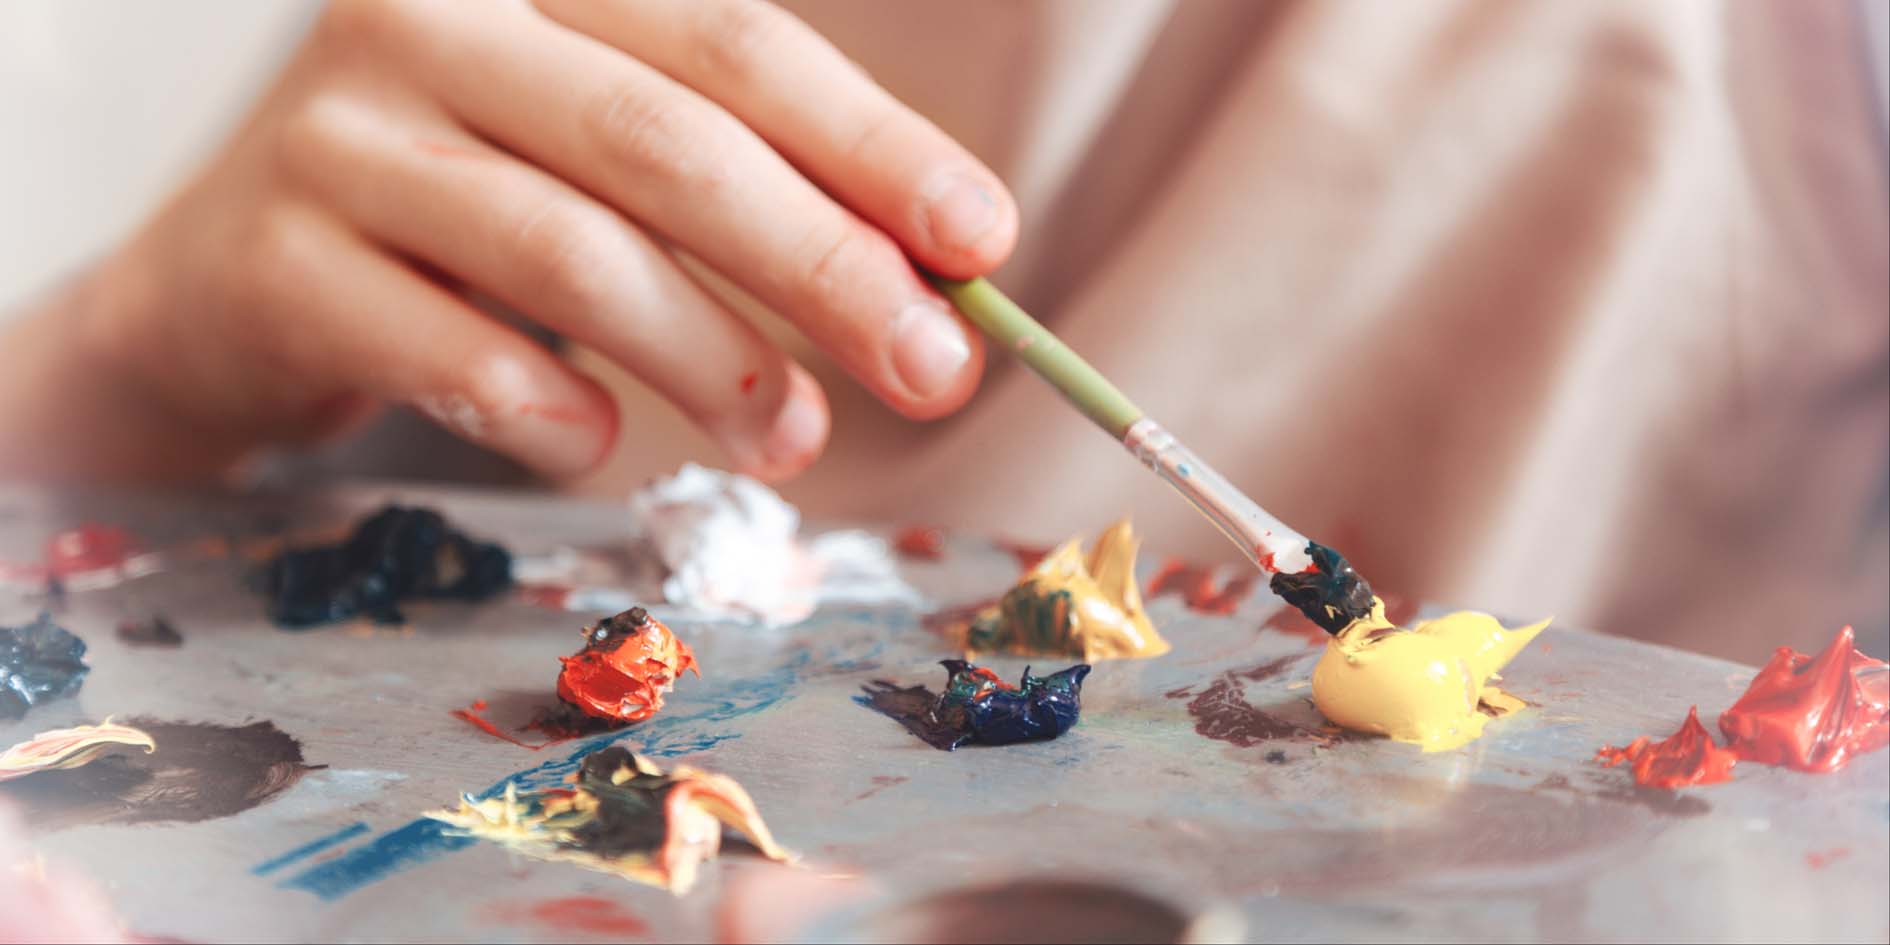 Teen art workshops are being held at Orion these school holidays